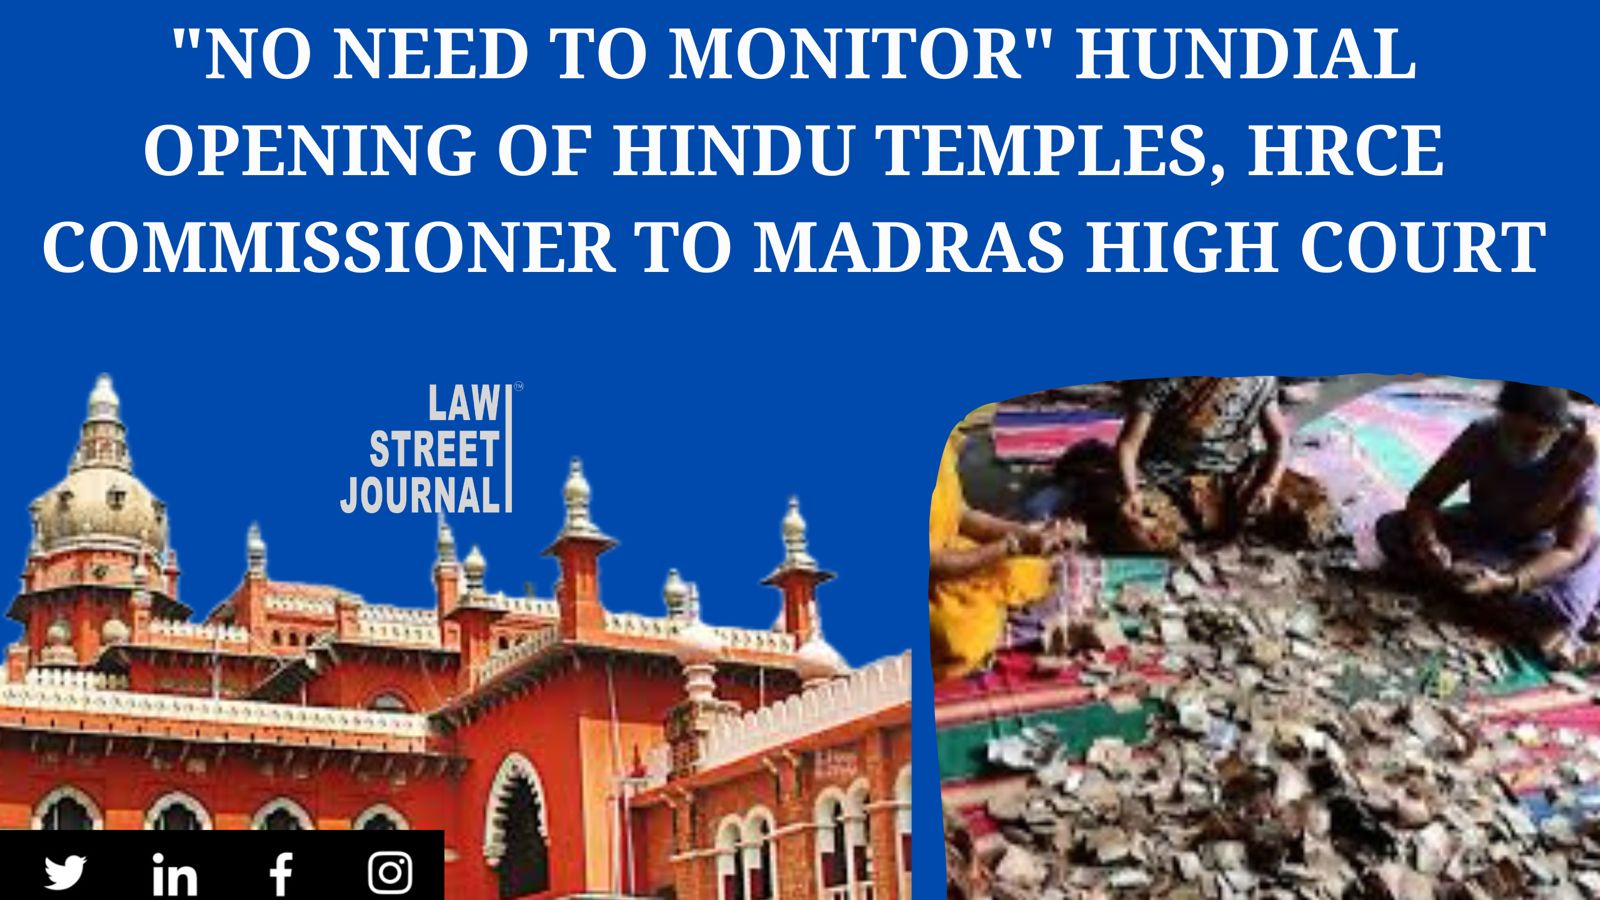 "No need to monitor" hundial opening of Hindu temples, Tamil Nadu HRCE Commissioner tells Madras High Court